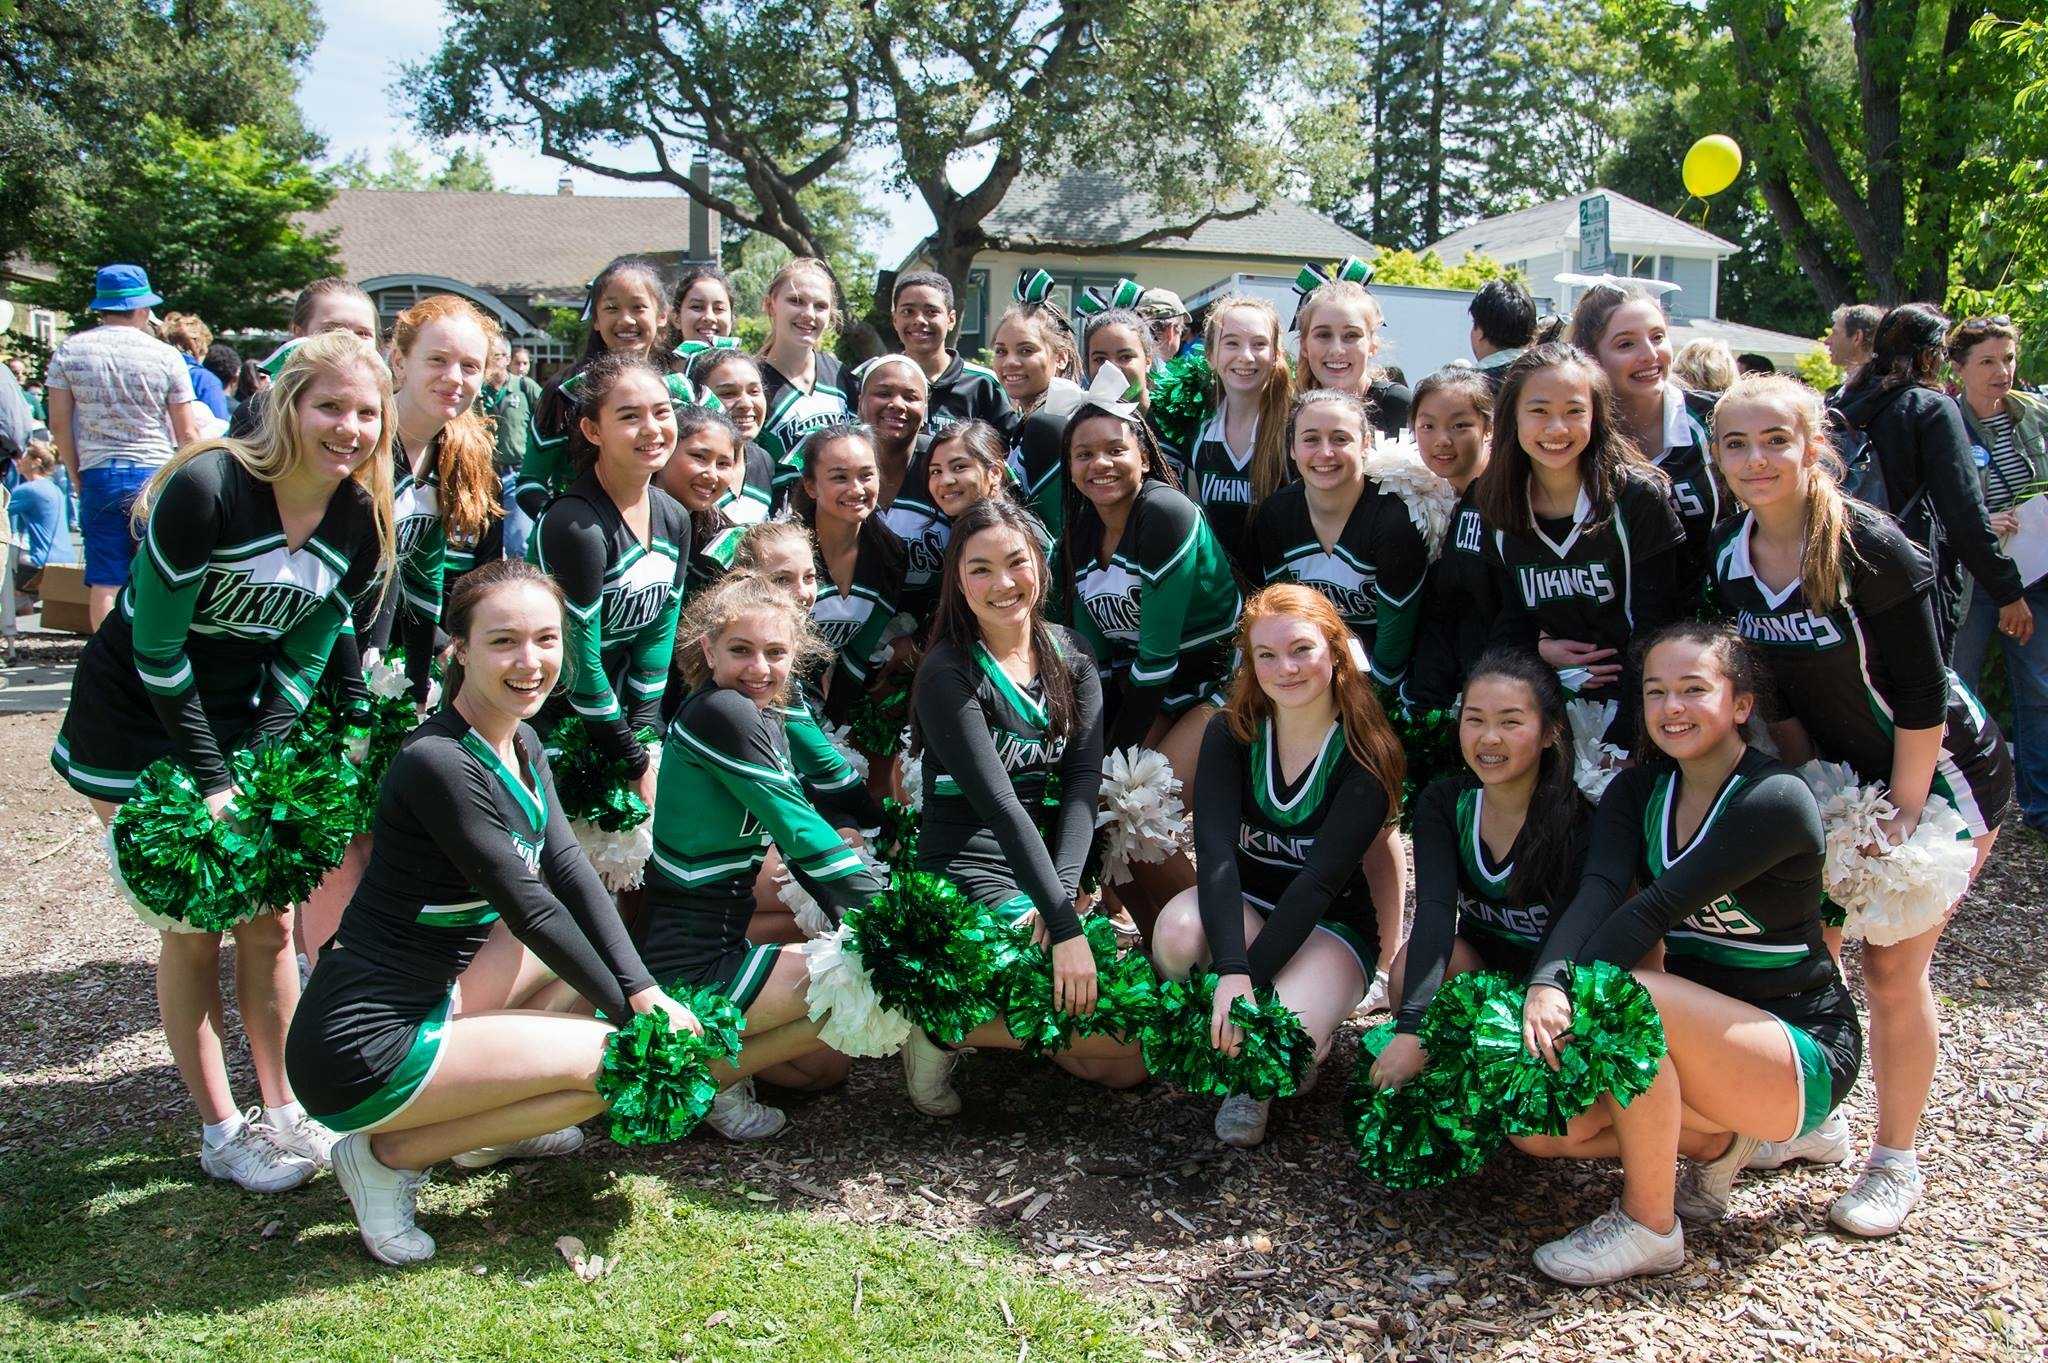 Paly cheer coach unexpectedly resigns